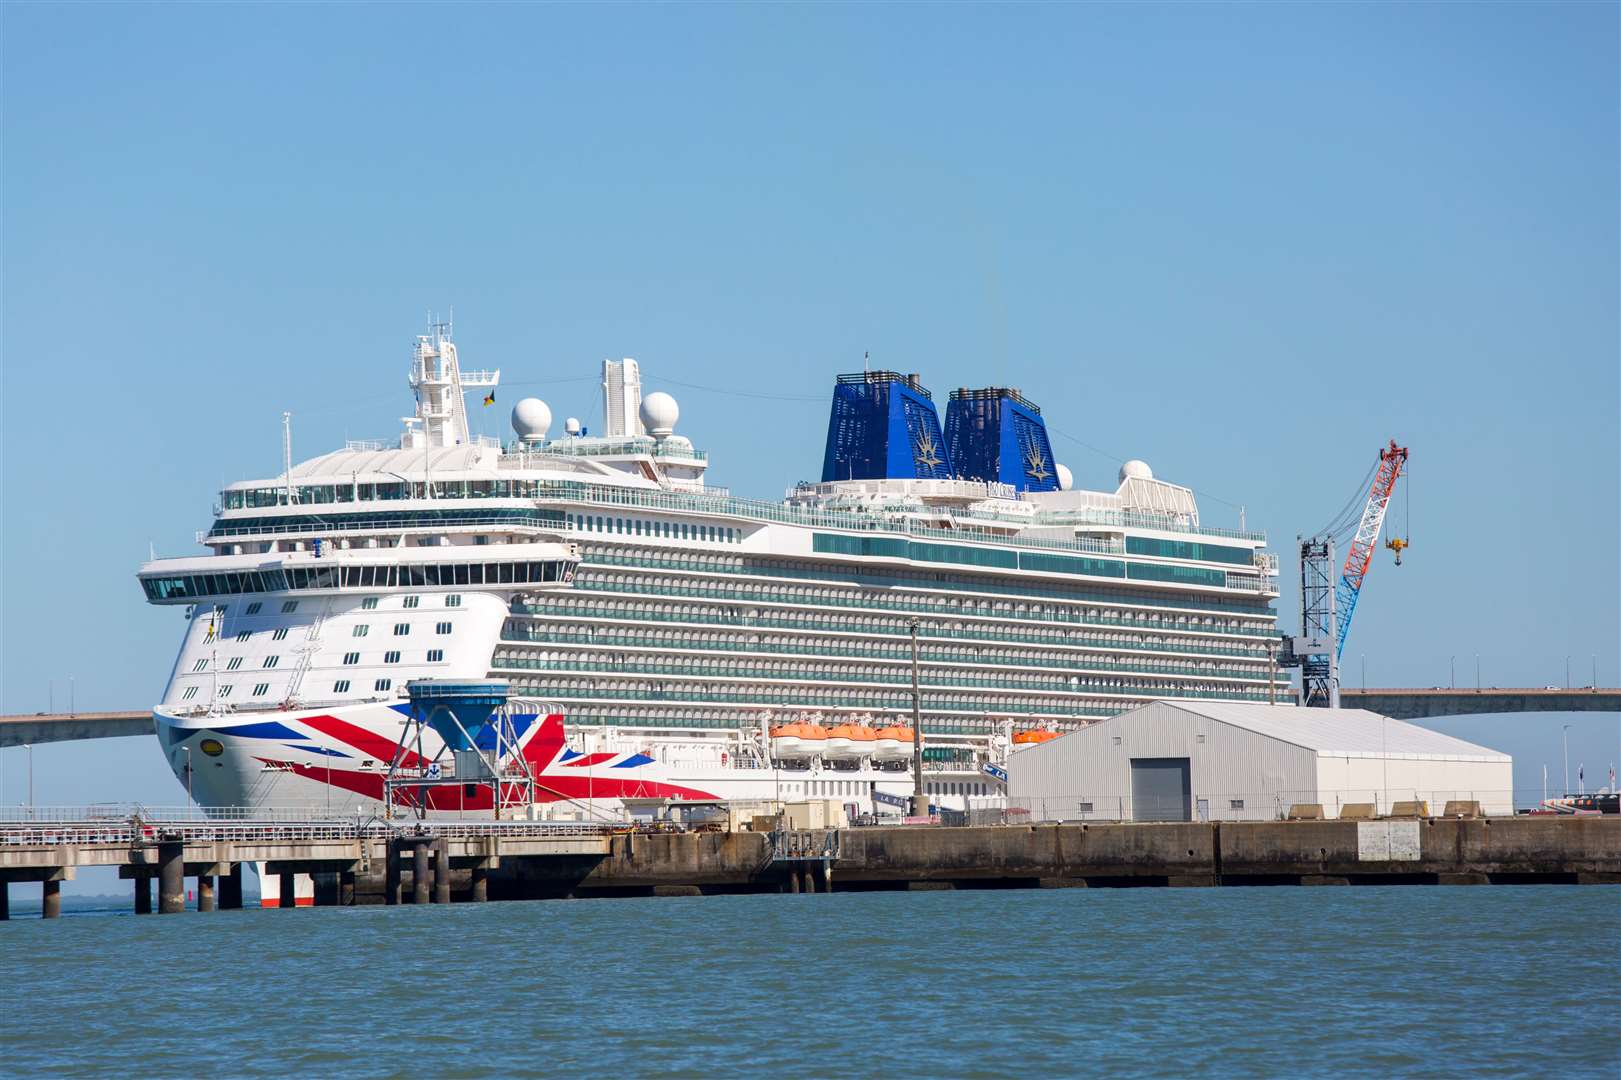 Murray Travel has reassured customers that P&O Cruises is a separate entity from P&O Ferries and that planned holidays will not be affected by the dispute.